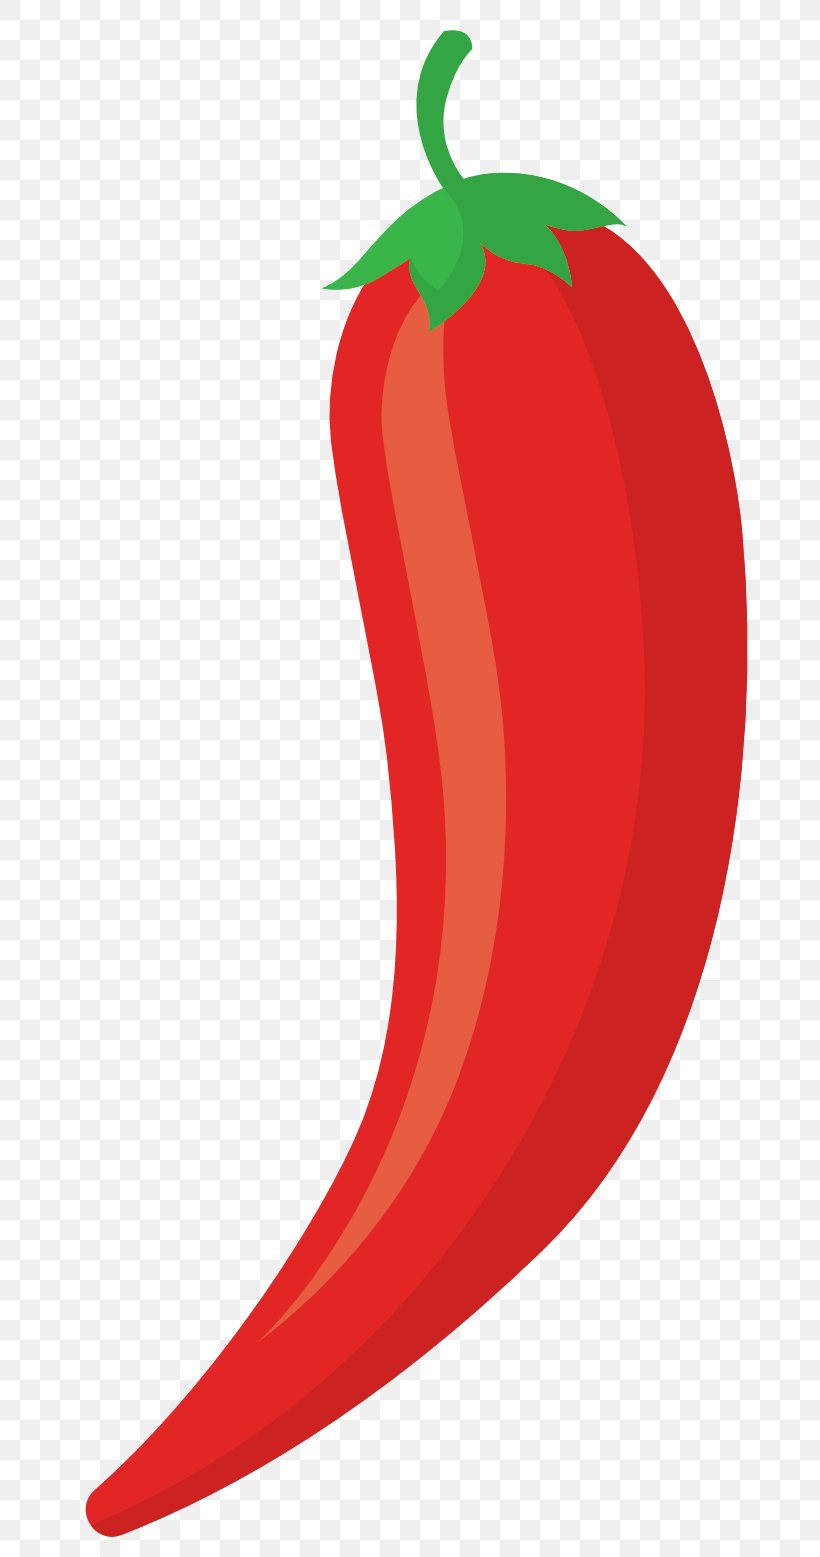 Tabasco Pepper Cayenne Pepper Chili Pepper Peperoncino Paprika, PNG, 745x1557px, Tabasco Pepper, Apple, Bell Pepper, Bell Peppers And Chili Peppers, Capsicum Download Free